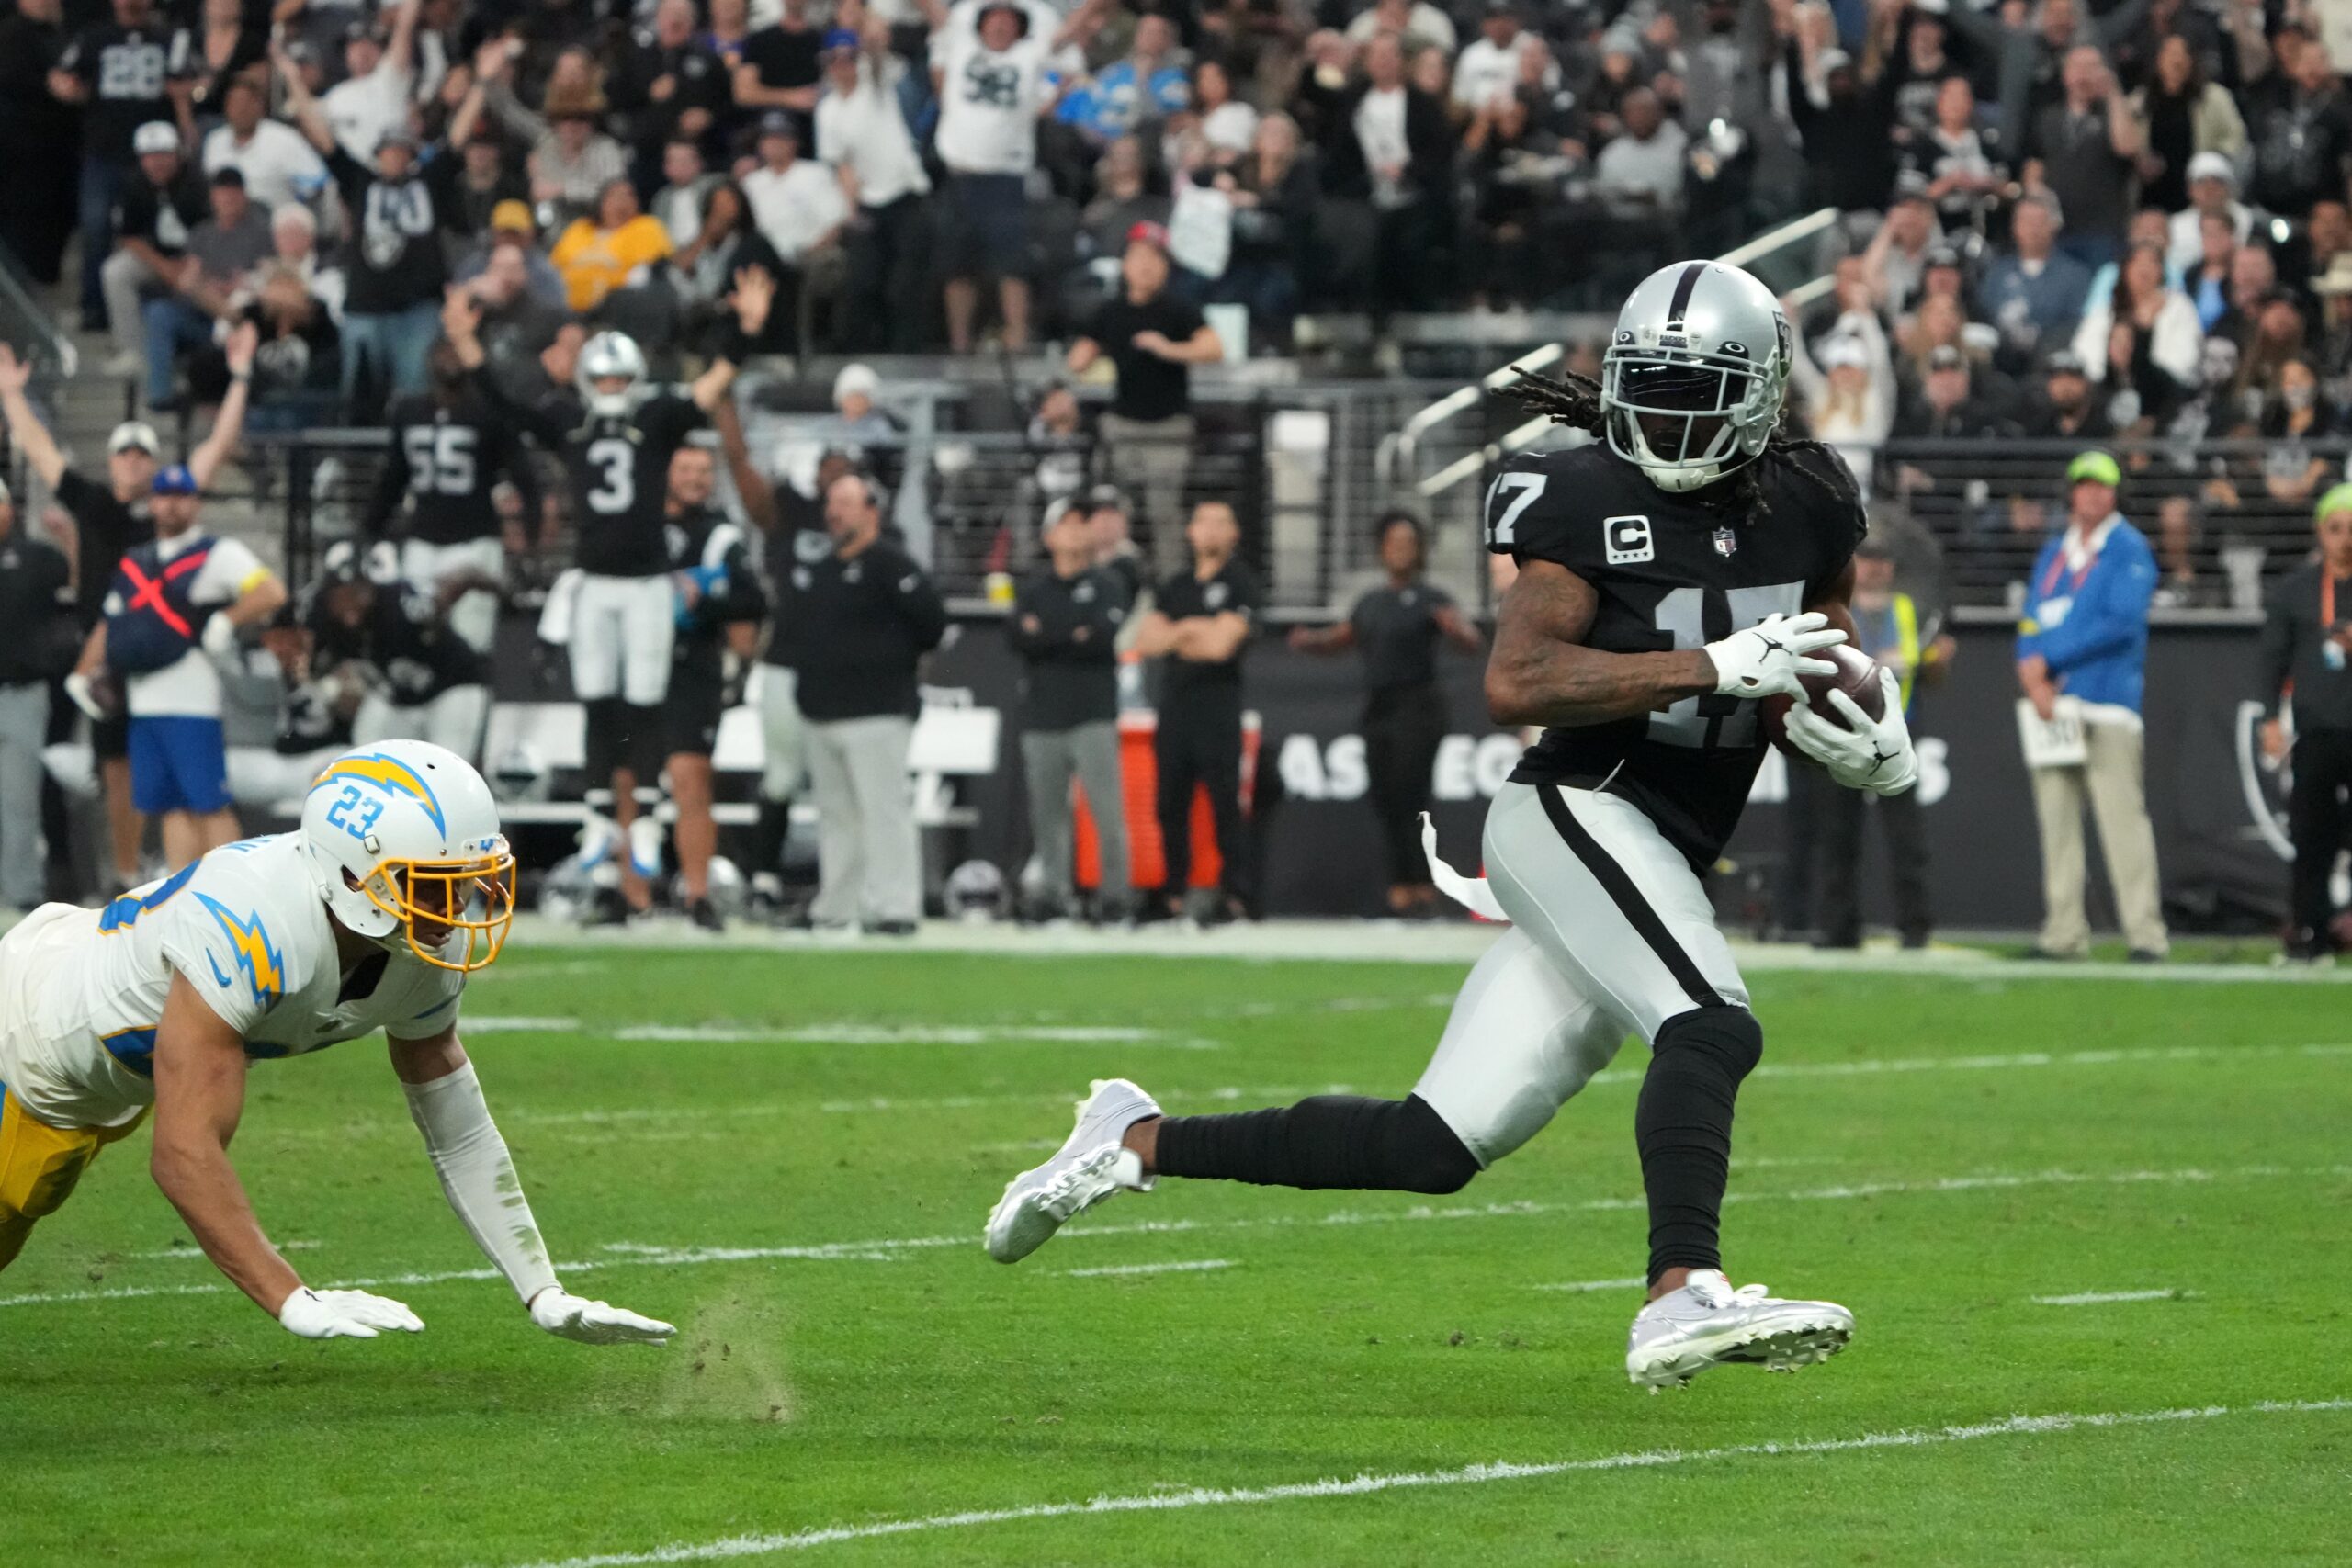 Las Vegas Raiders wide receiver Davante Adams (17) scores on a 45-yard touchdown reception against Los Angeles Chargers cornerback Bryce Callahan (23) n the second half at Allegiant Stadium. The Raiders defeated the Chargers 27-20. Mandatory Credit: Kirby Lee-USA TODAY Sports